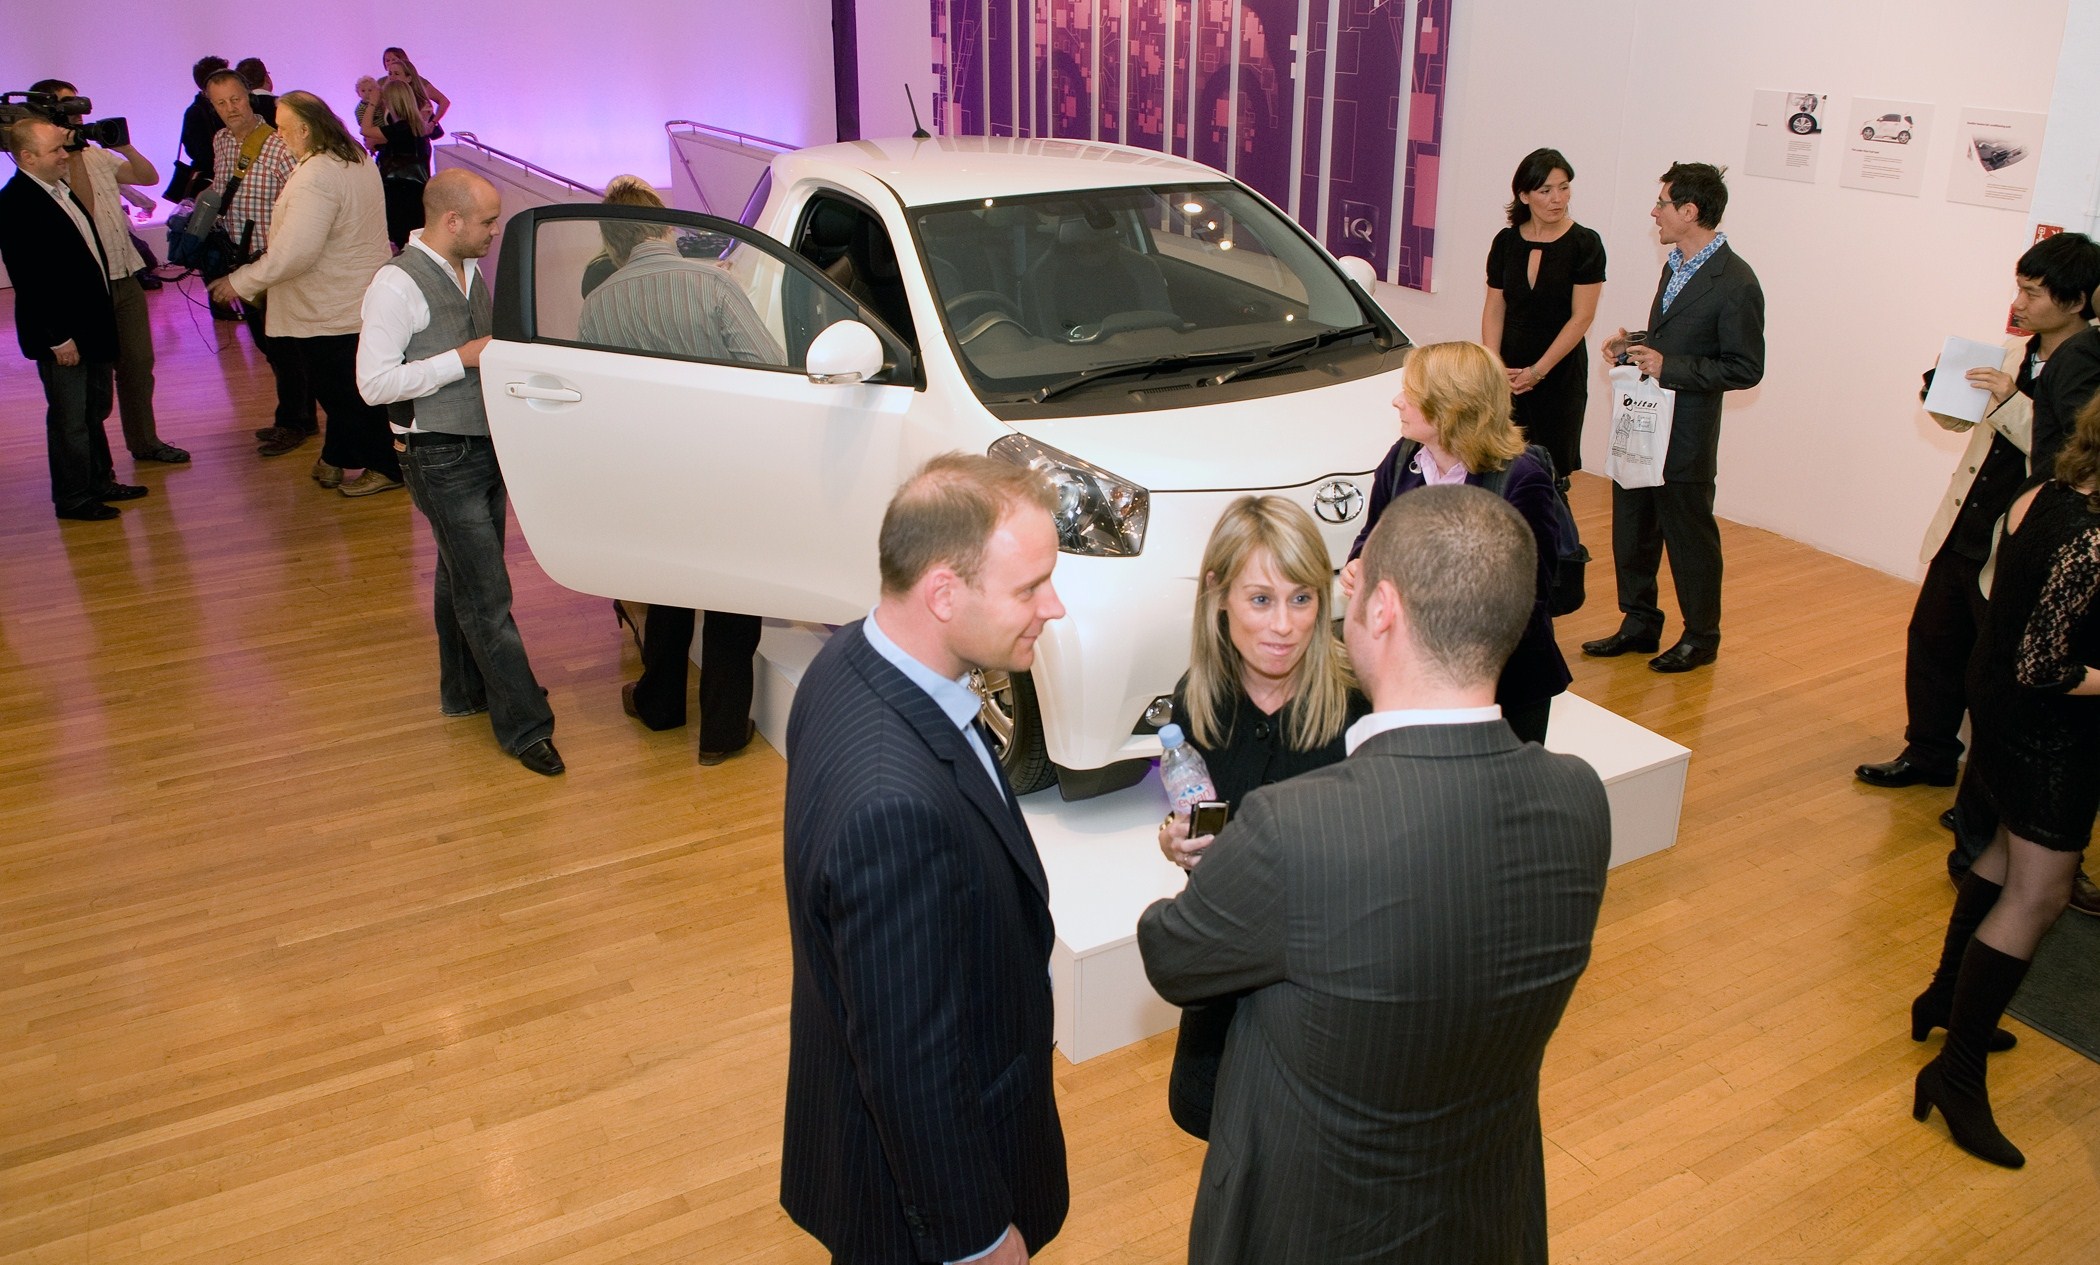 Toyota iQ exhibition at the Royal College of Art